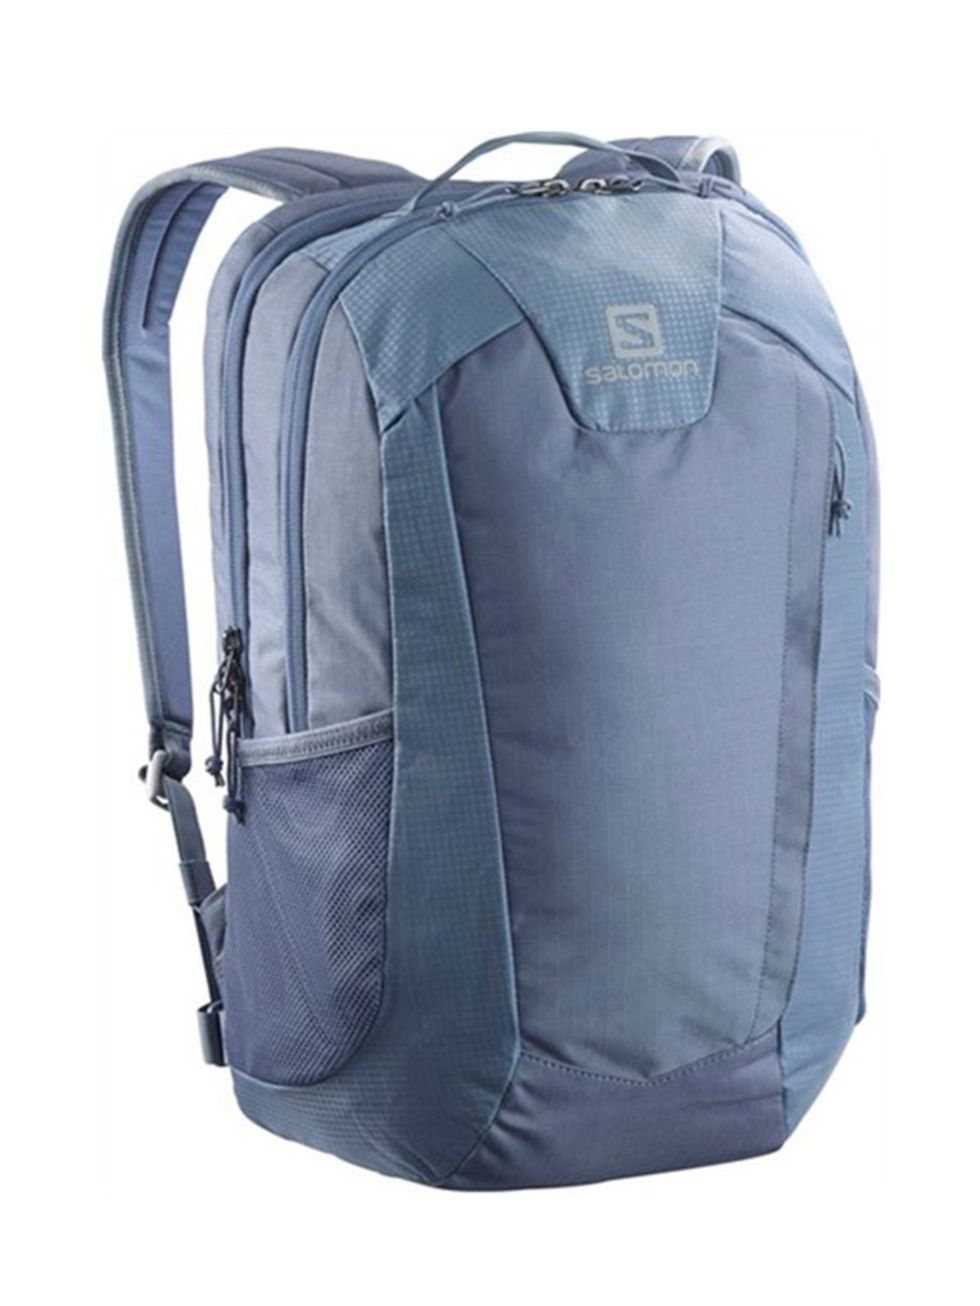 <p><a href="http://www.salomon.com/uk/product/commuter-rx.html" target="_blank">Salomon Commuter RX £50 </a></p>

<p>Fully adjustable to fit you snugly on the run, this commuter pack includes a laptop compartment plus multiple extra pockets to handily sto